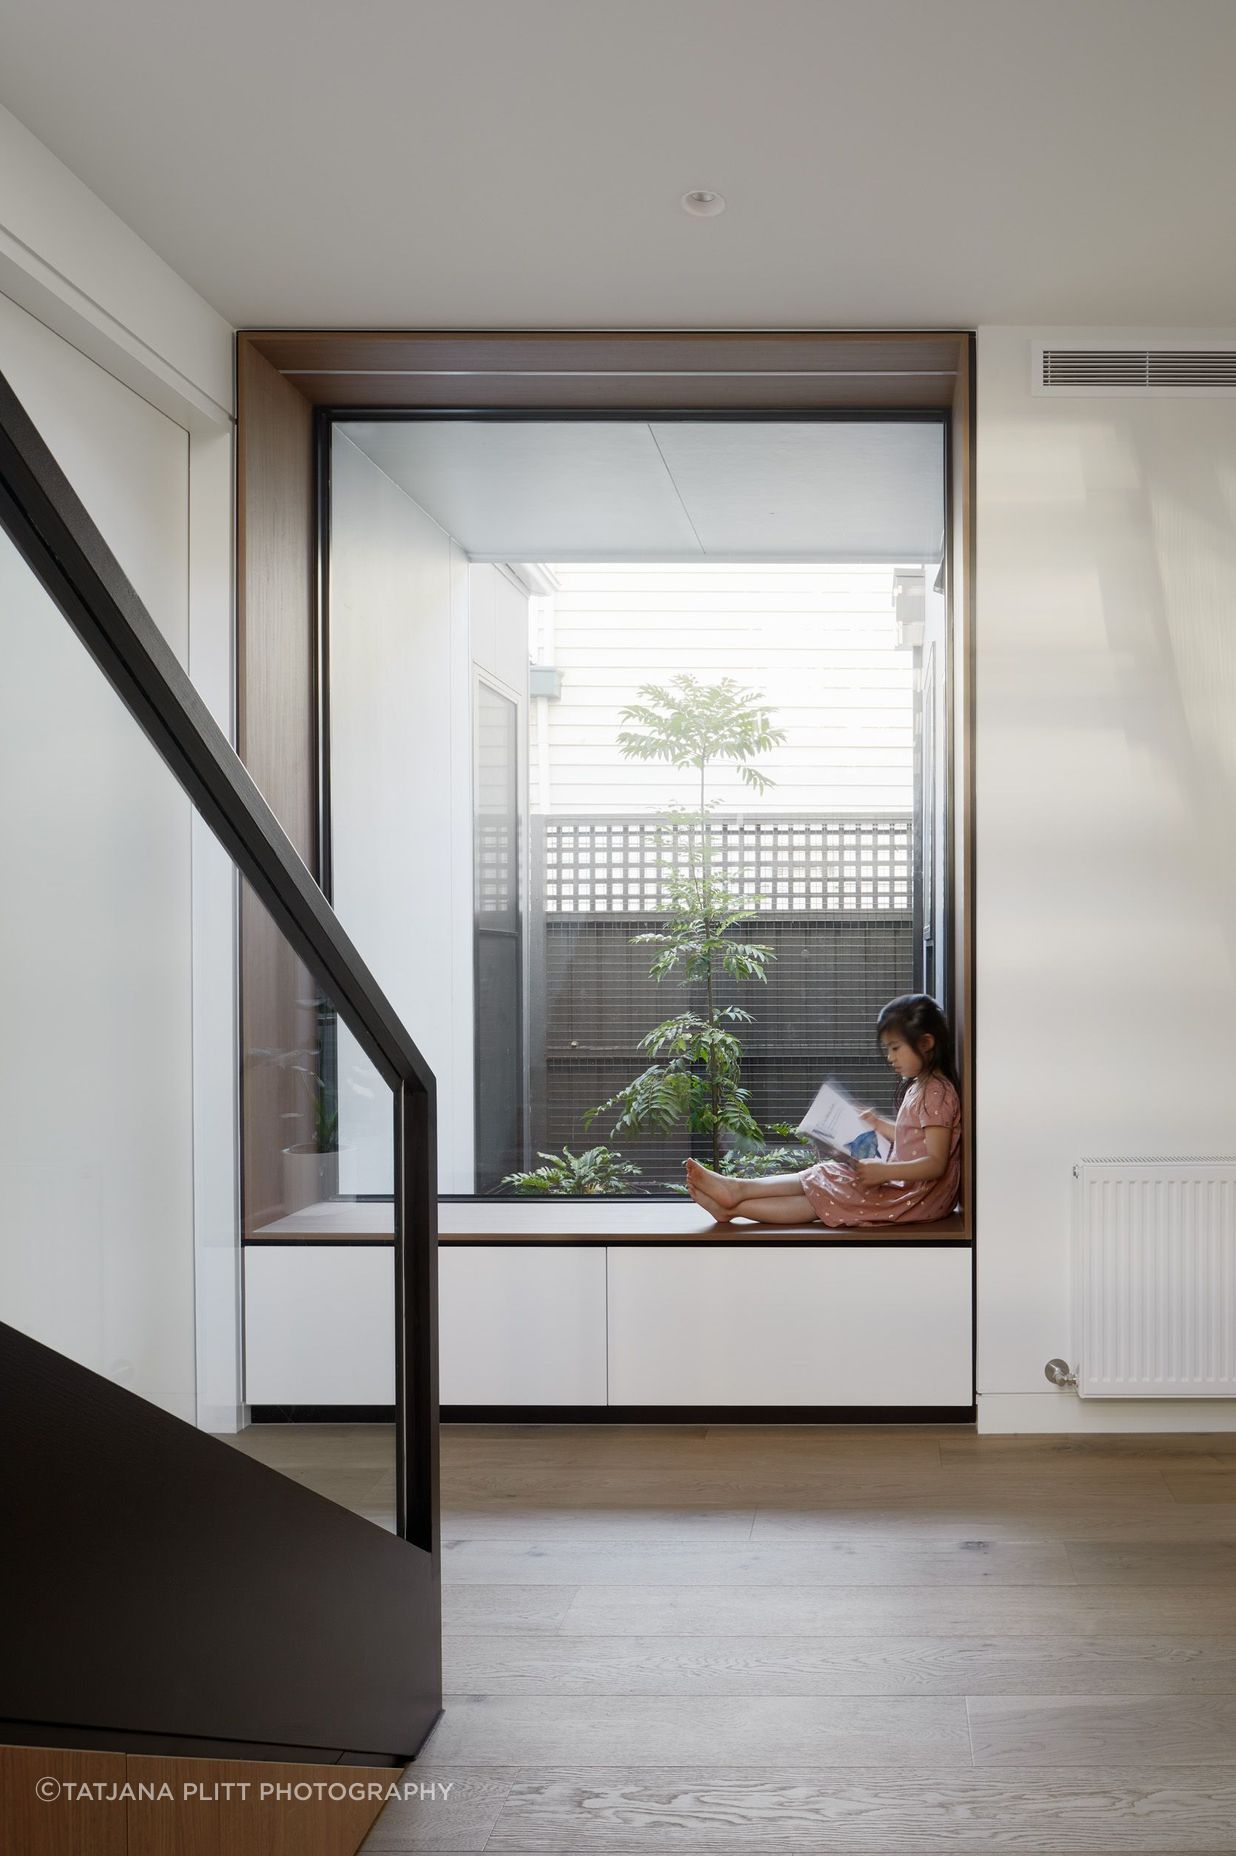 A reading nook with a large window overlooking an internal courtyard has been added where the extension meets the front of the home.